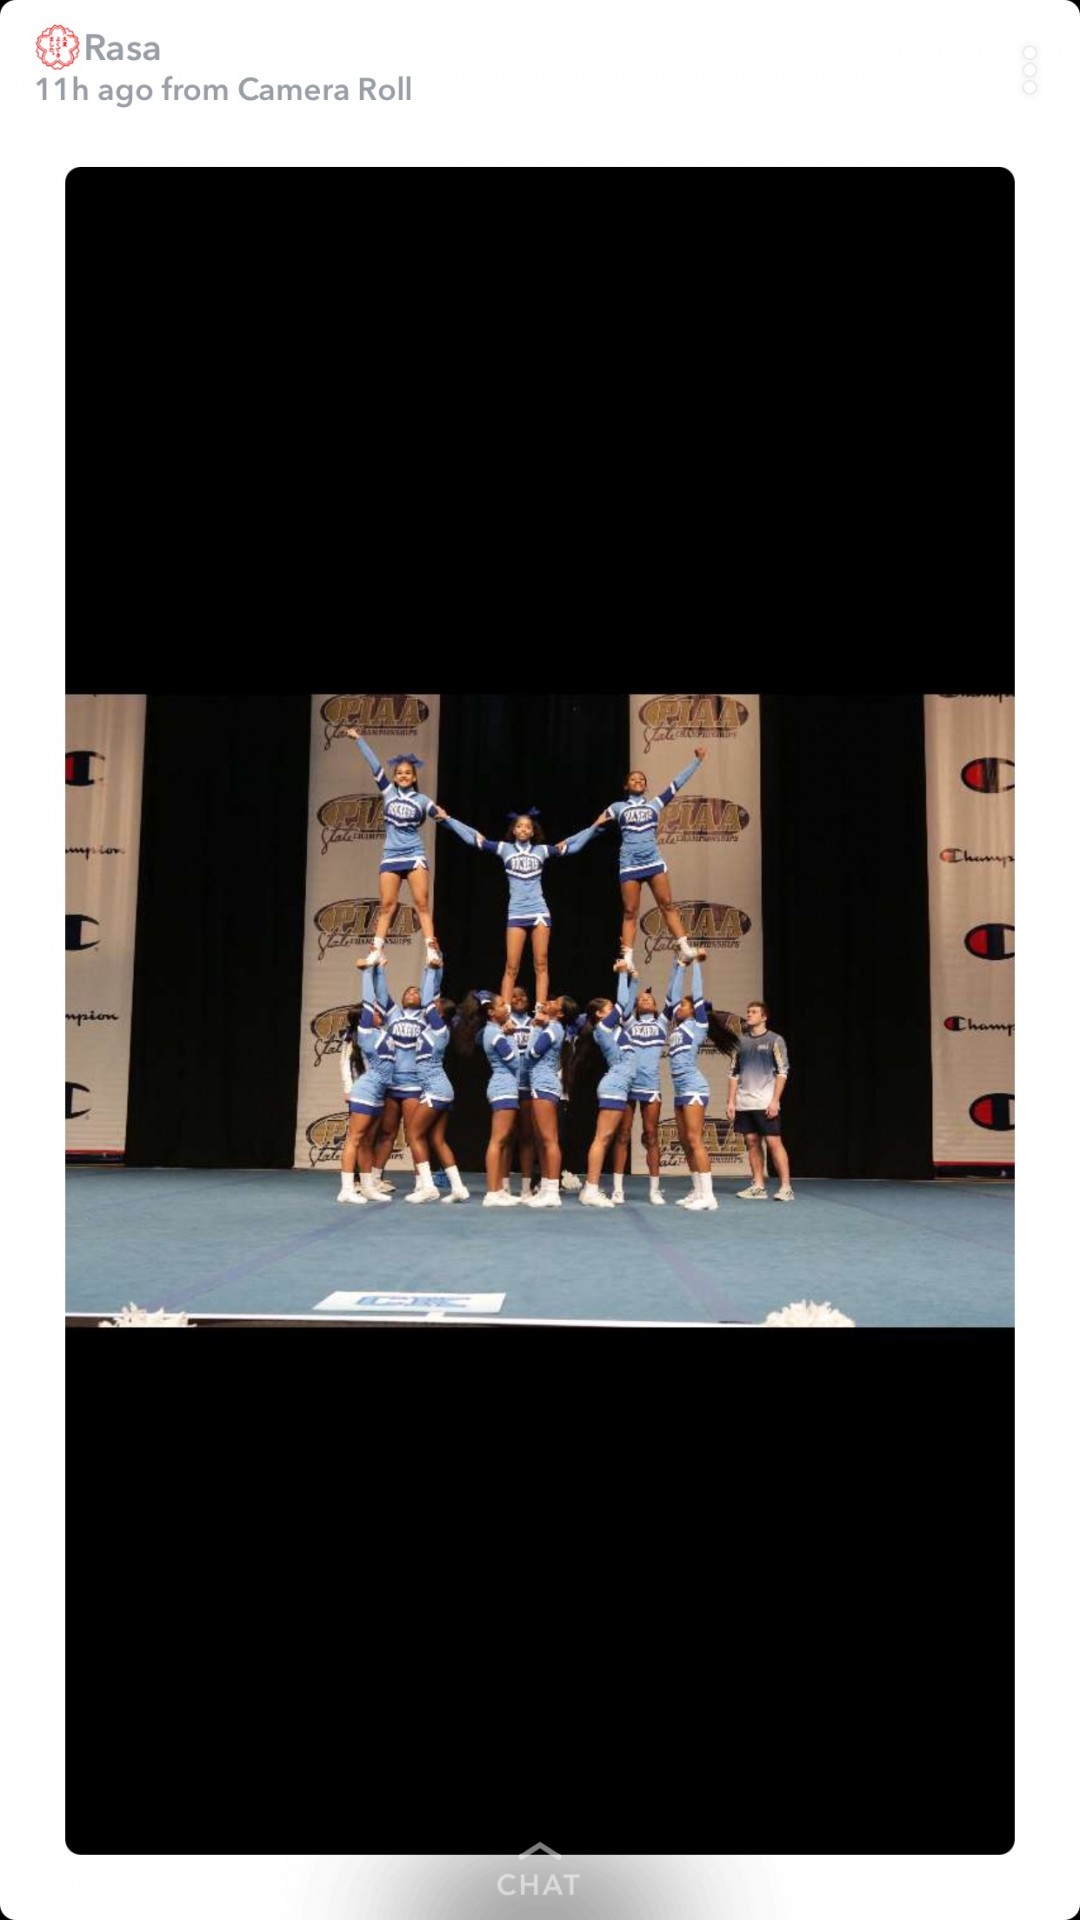 This was our cheerleading competition for States in Hershey, Pennsylvania.